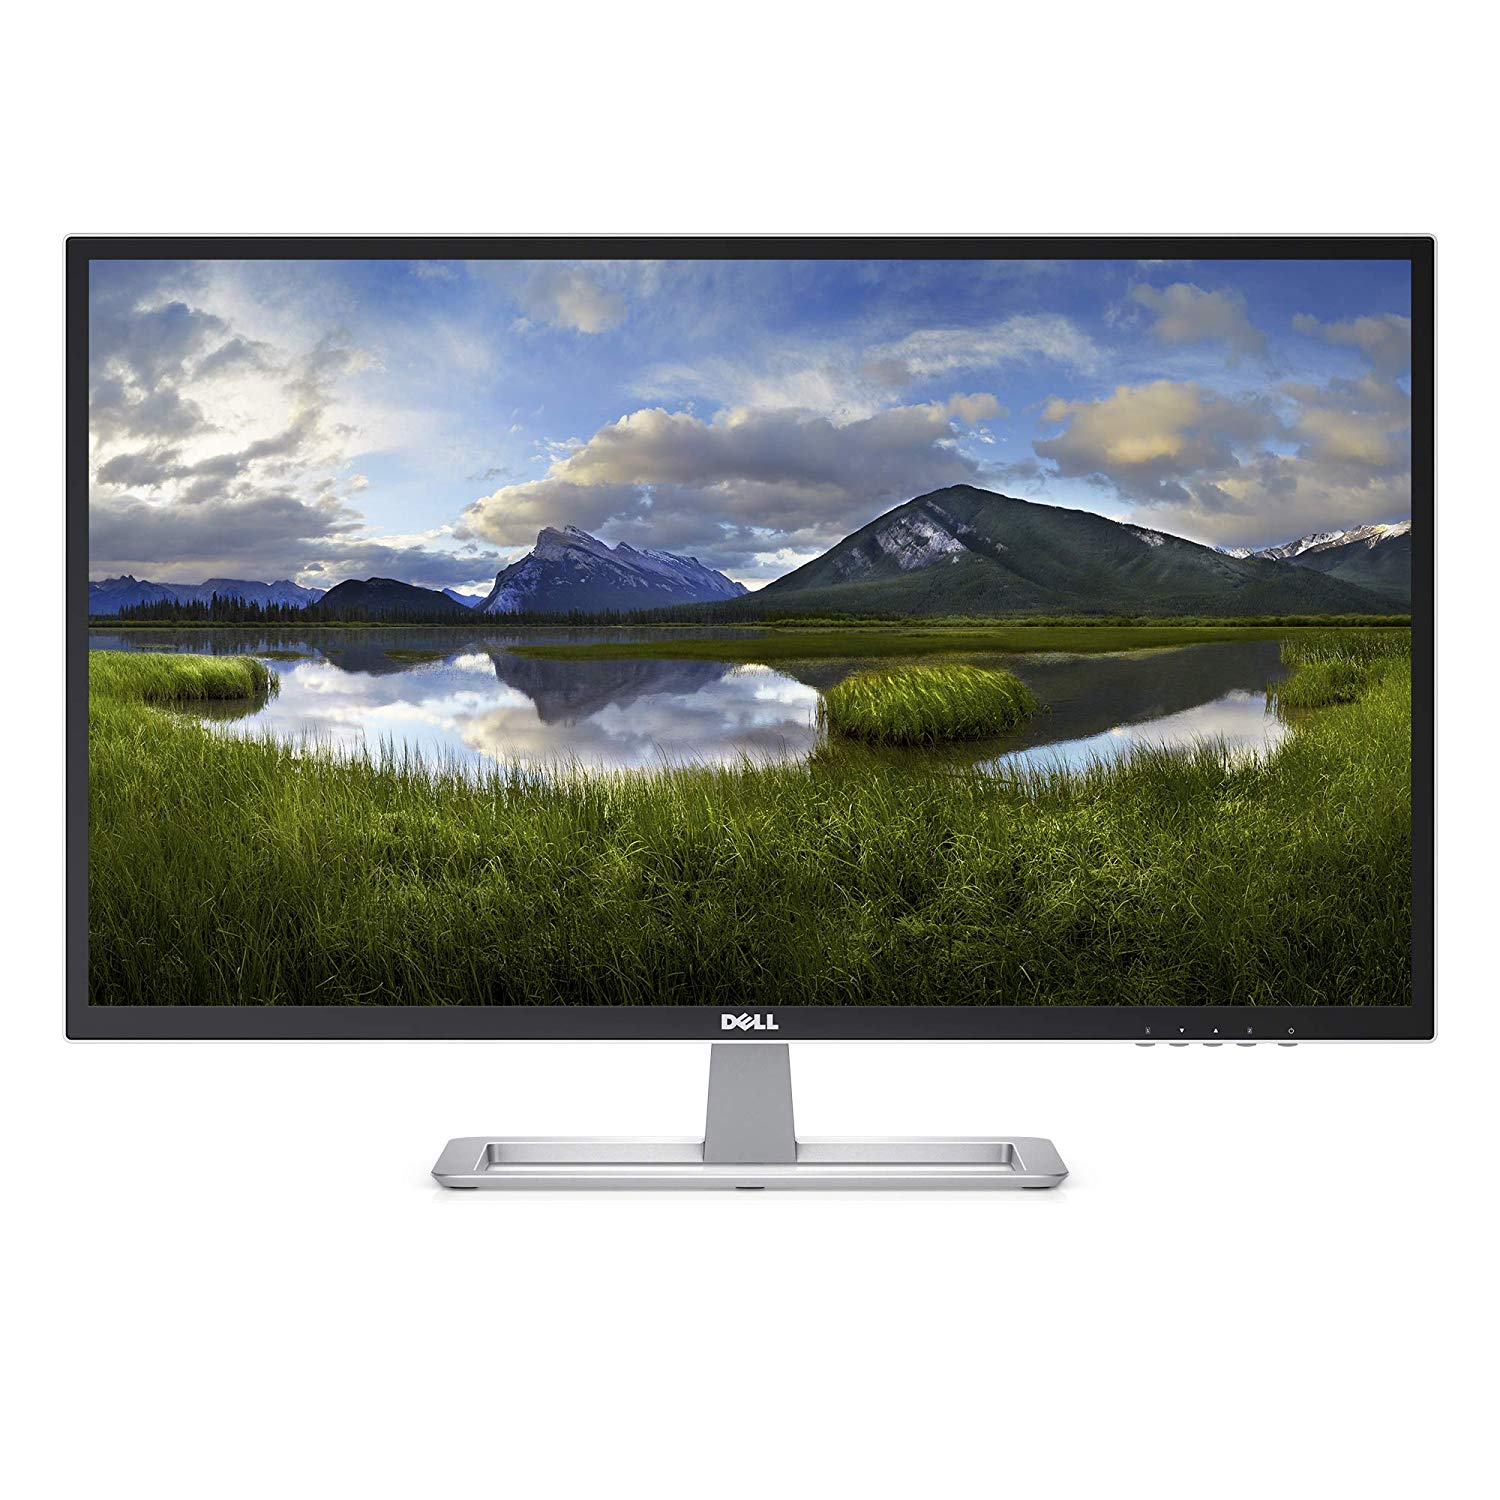 Dell D Series 31.5" FHD IPS Monitor